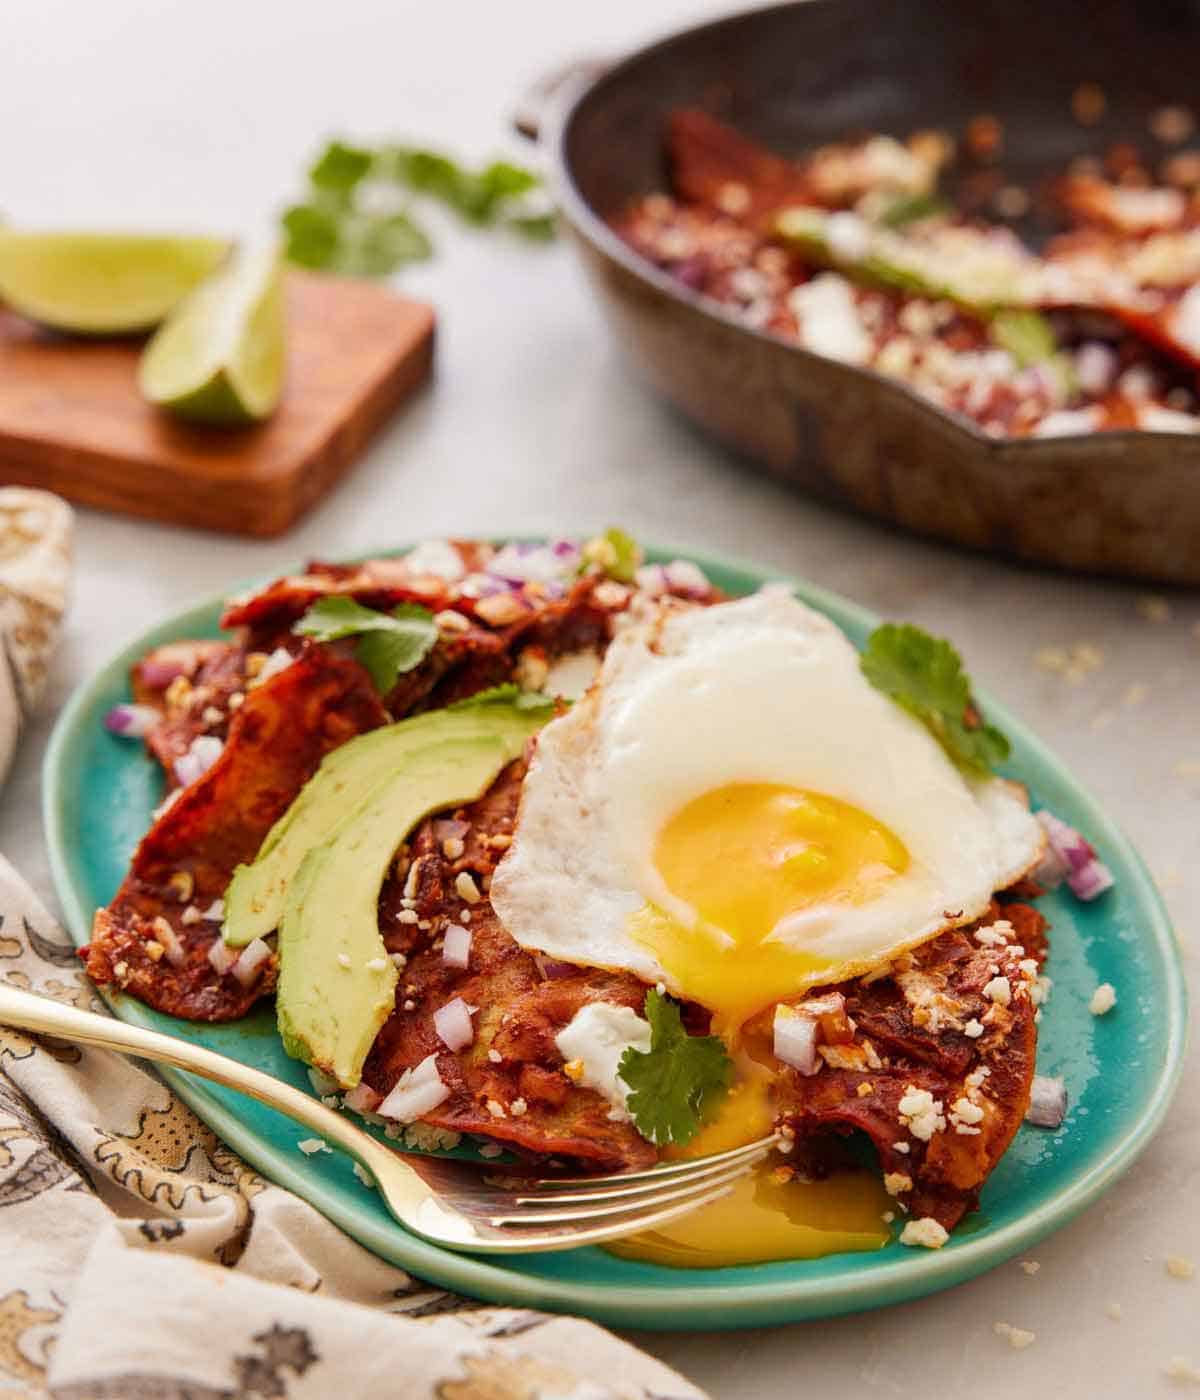 A plate with a serving of chilaquiles topped with a fried egg, sliced avocado, and cilantro.